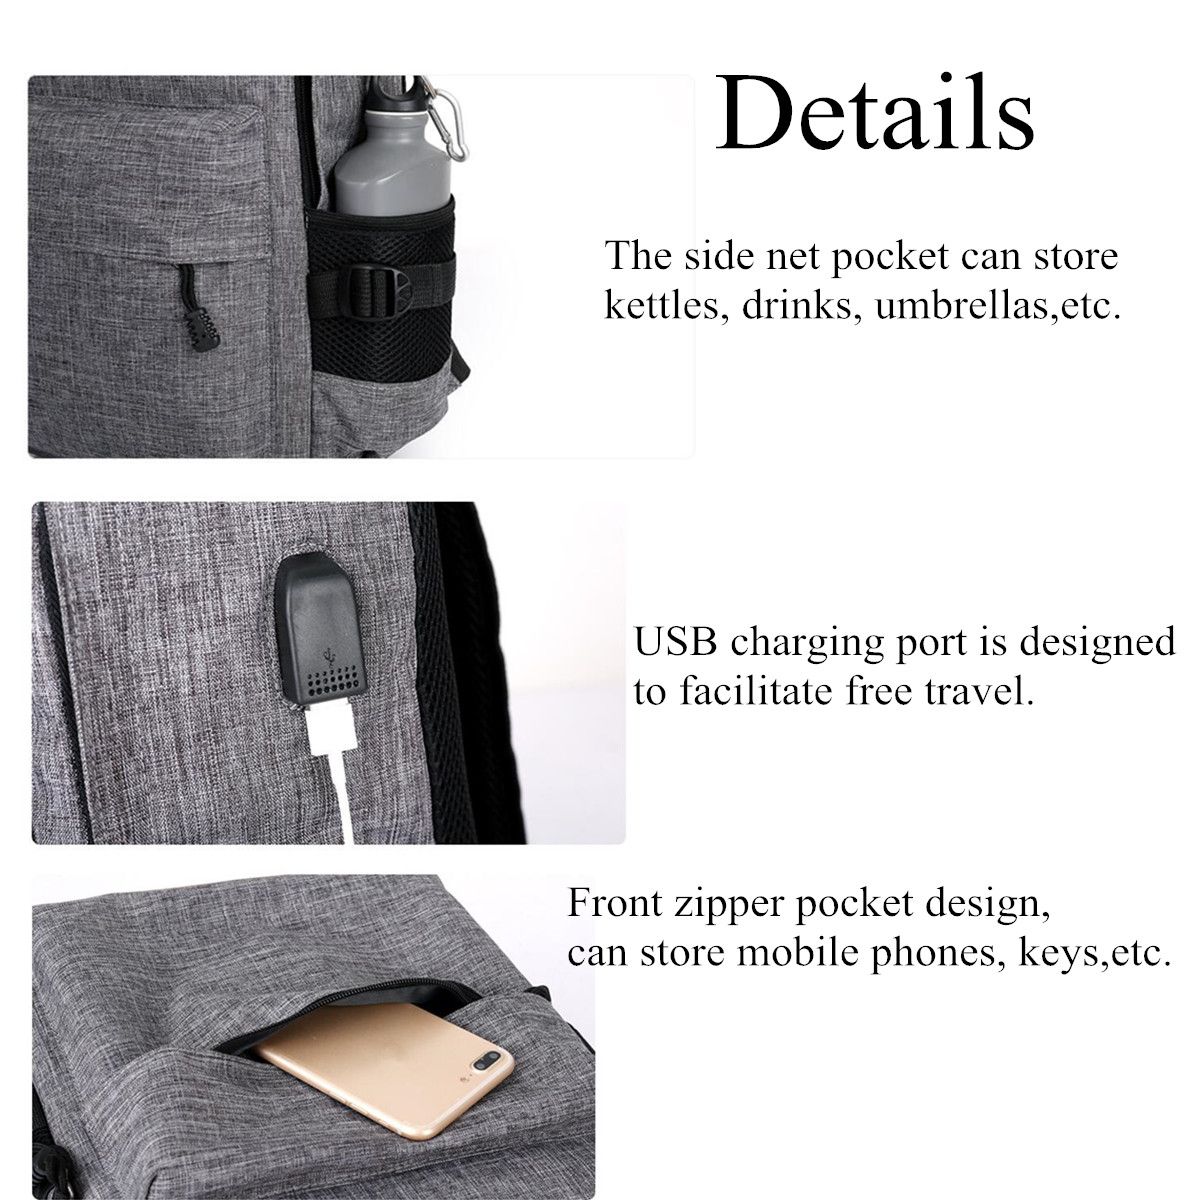 Laptop-Bag-Canvas-with-USB-Charging-Port-School-Travel-Business-Backpack-Unisex-1633818